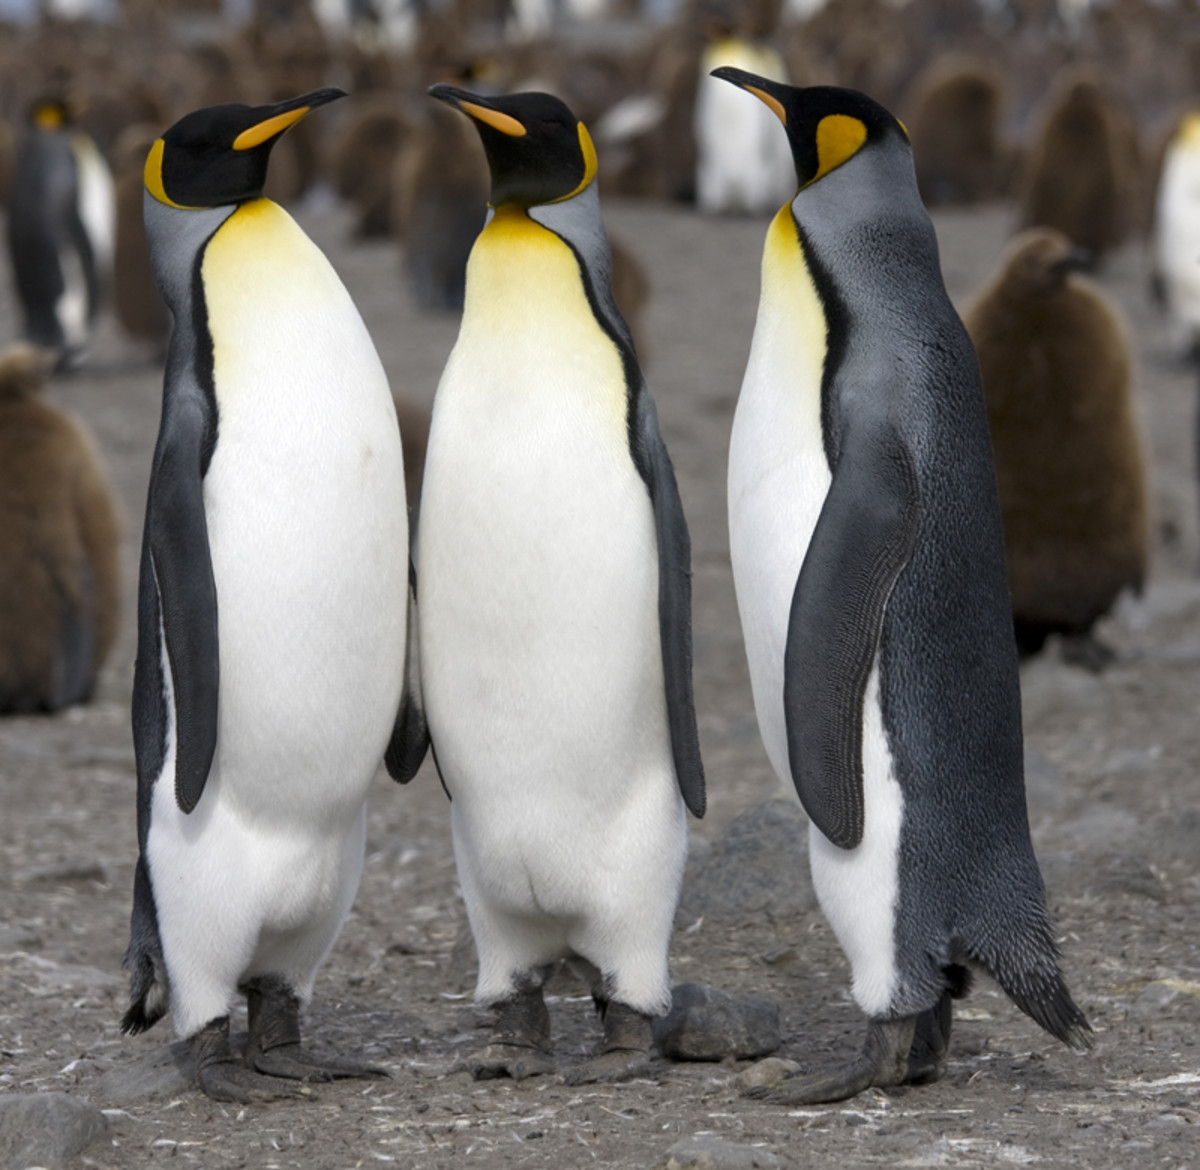 A King Penguin, not to be confused with the prehistoric Water King Penguin. Note it's tuxedo like appearance that the Water King Penguin would not have shared. 